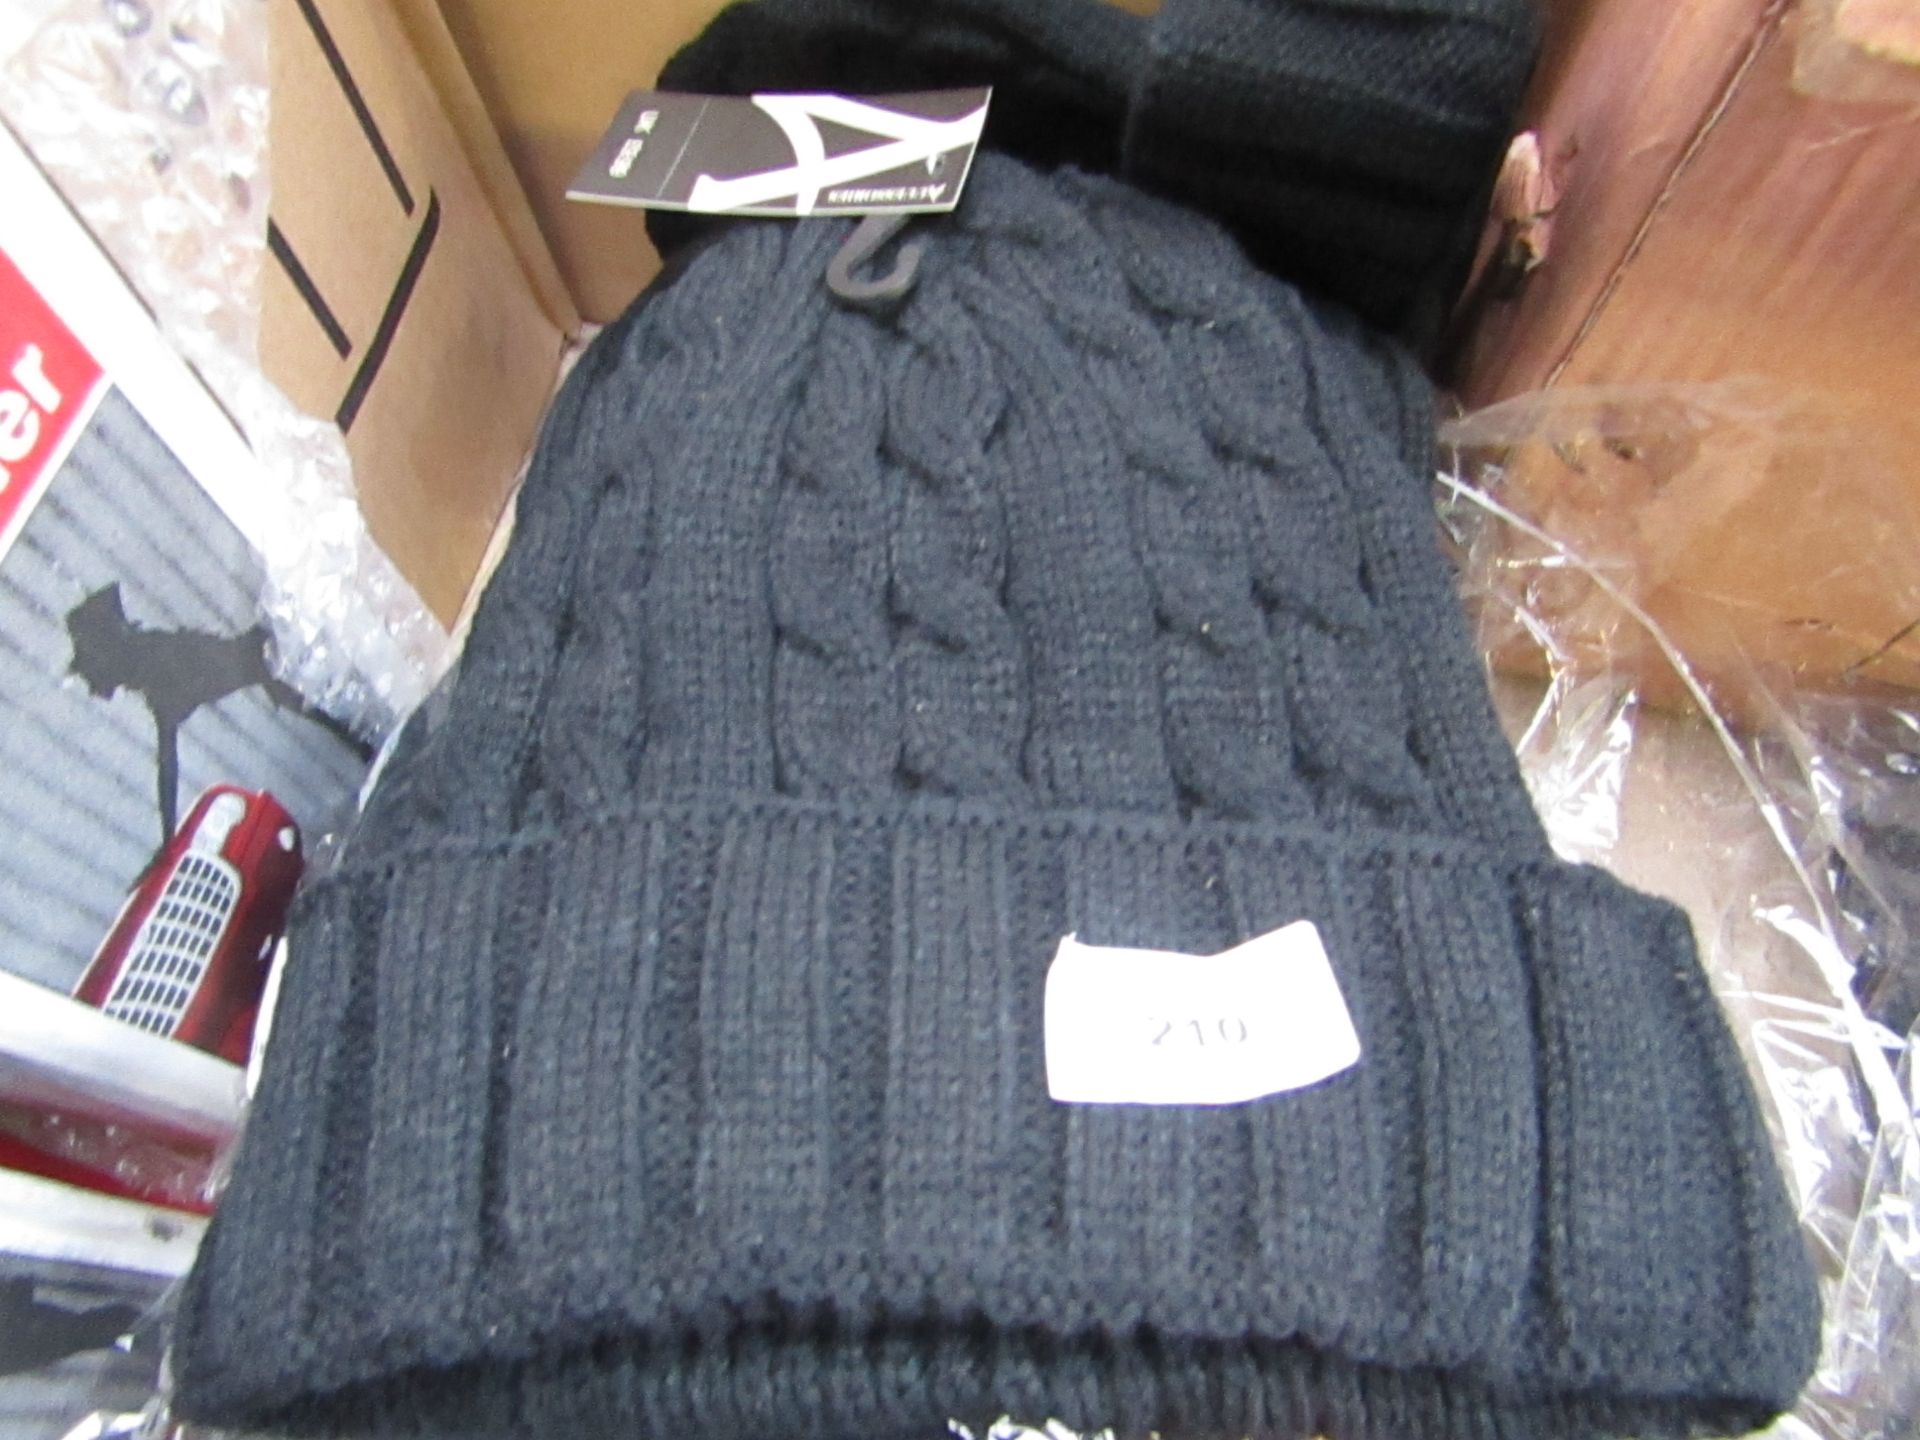 Approx 8x Accessorize beanie hats, new.